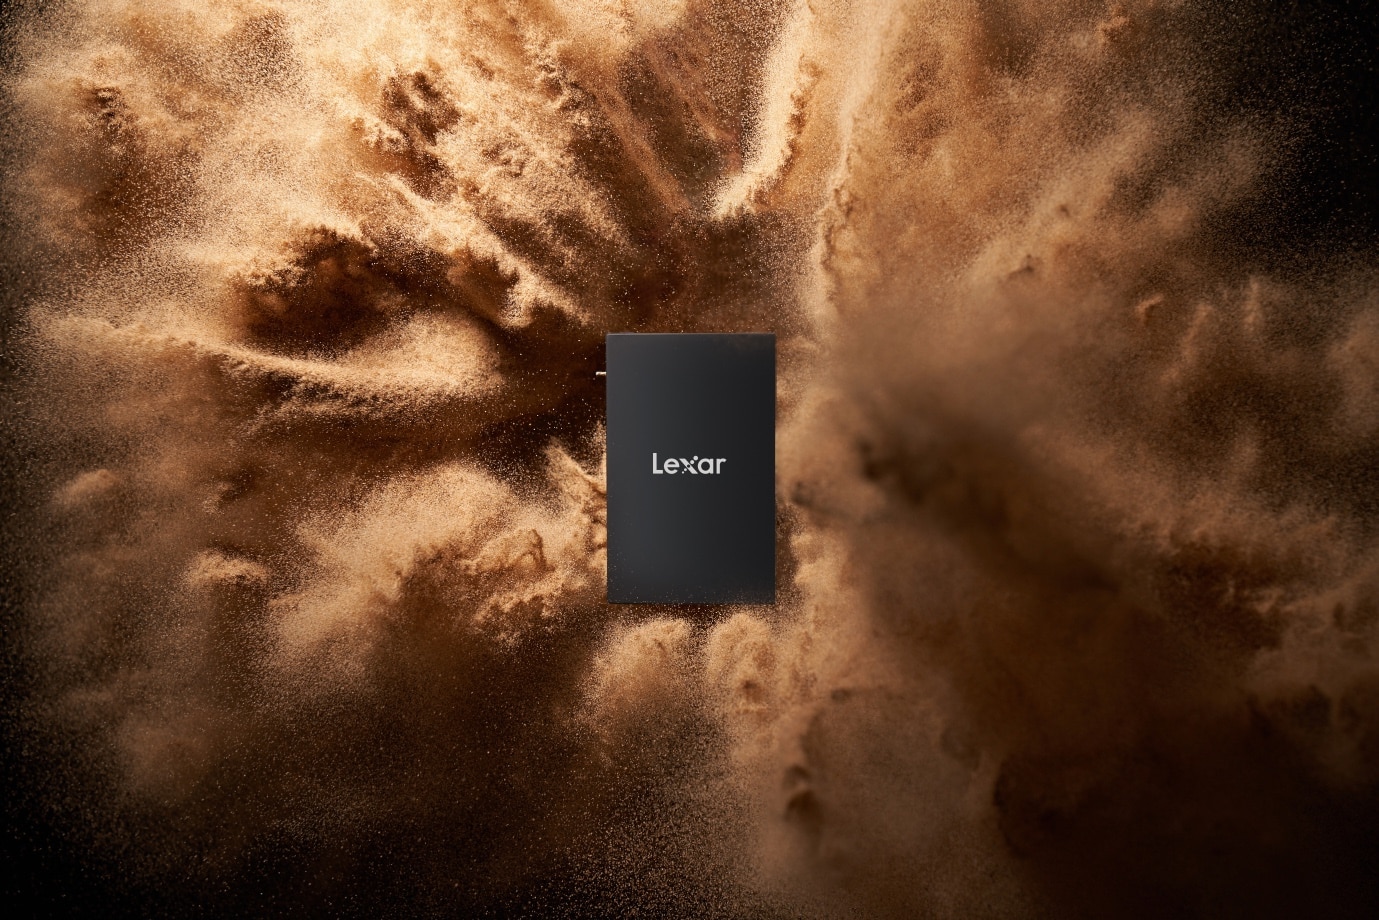 Lexar and Silicon Motion unveil next-generation portable solid